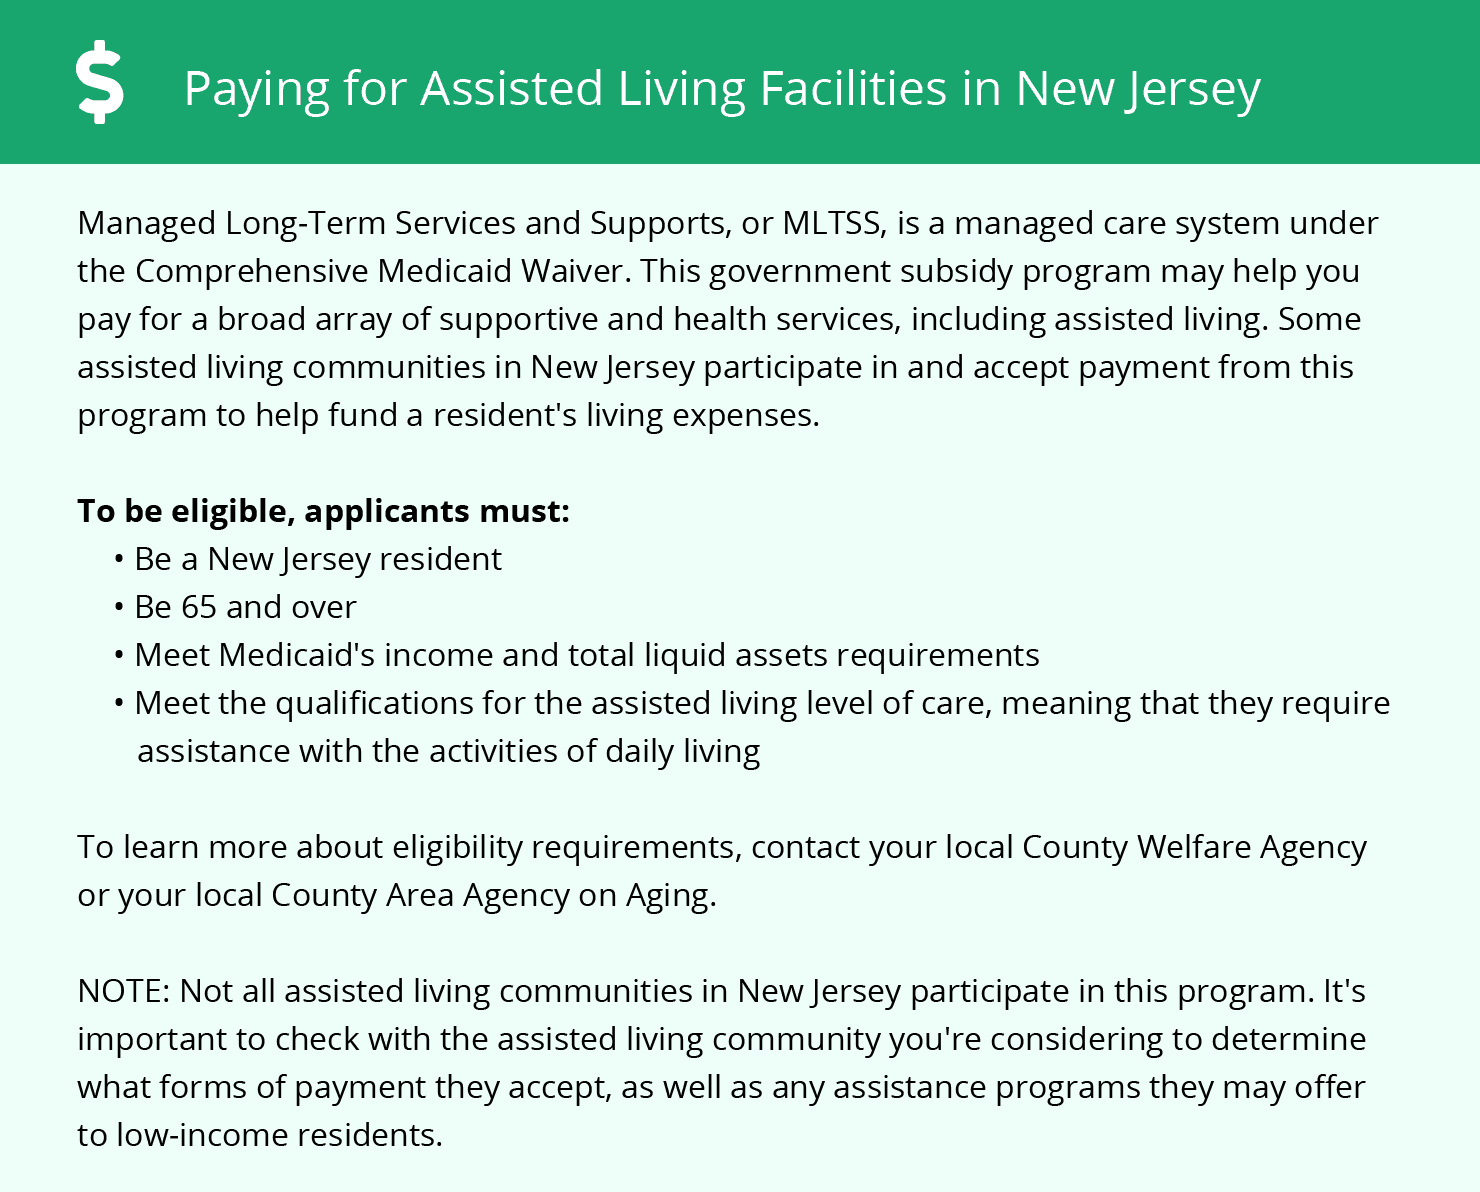 Financial Assistance for Assisted Living in New Jersey